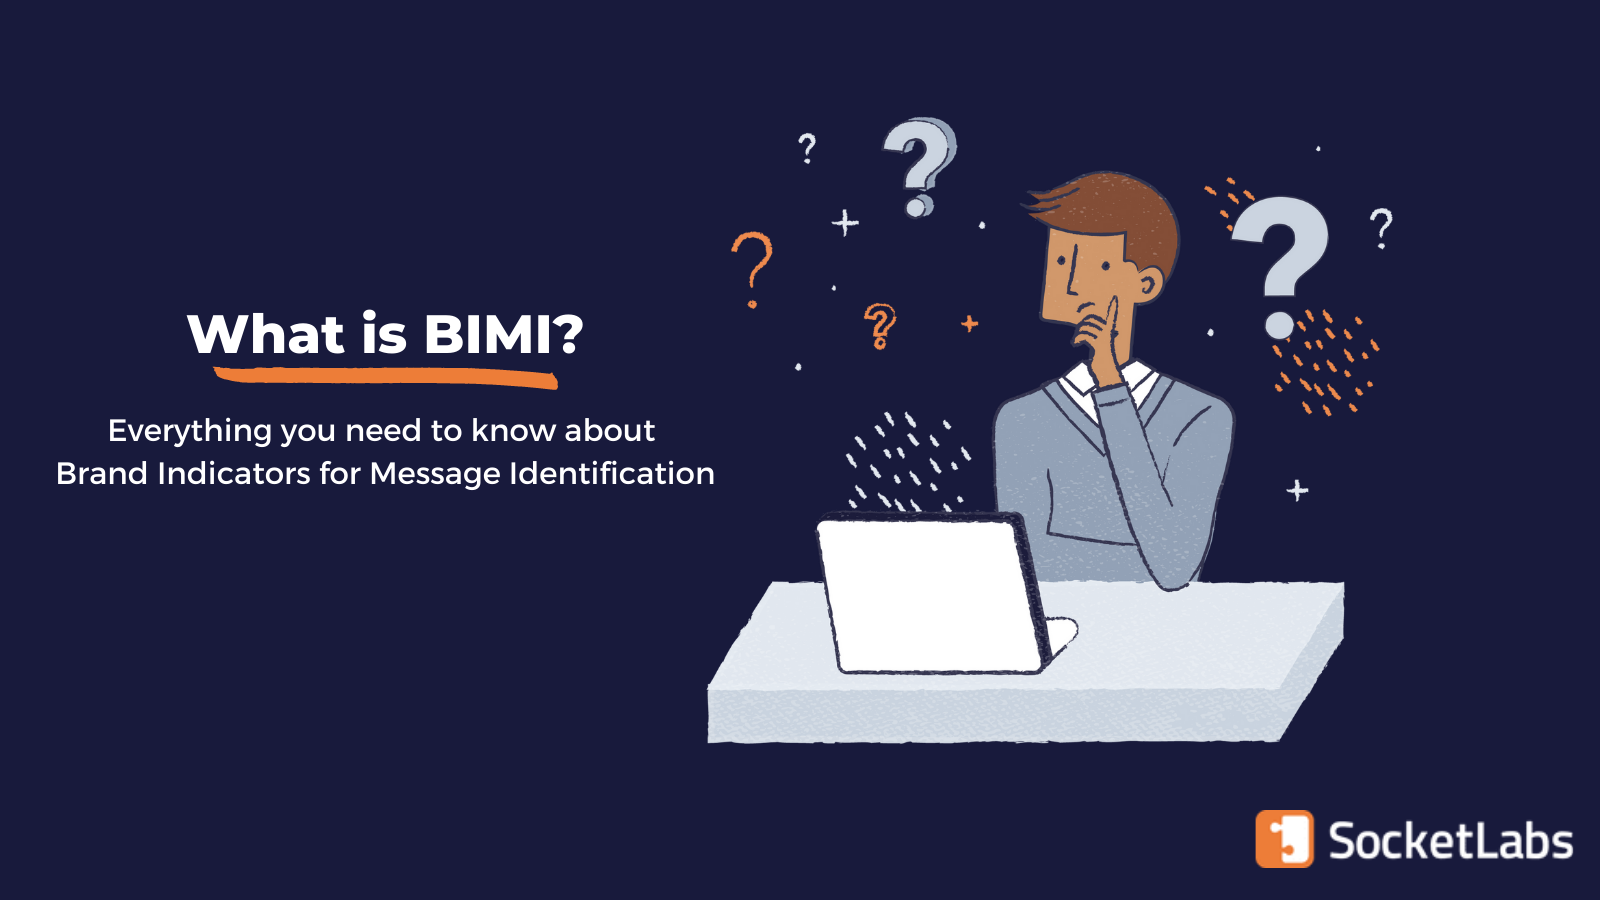 A confused person asking "What is BIMI?"